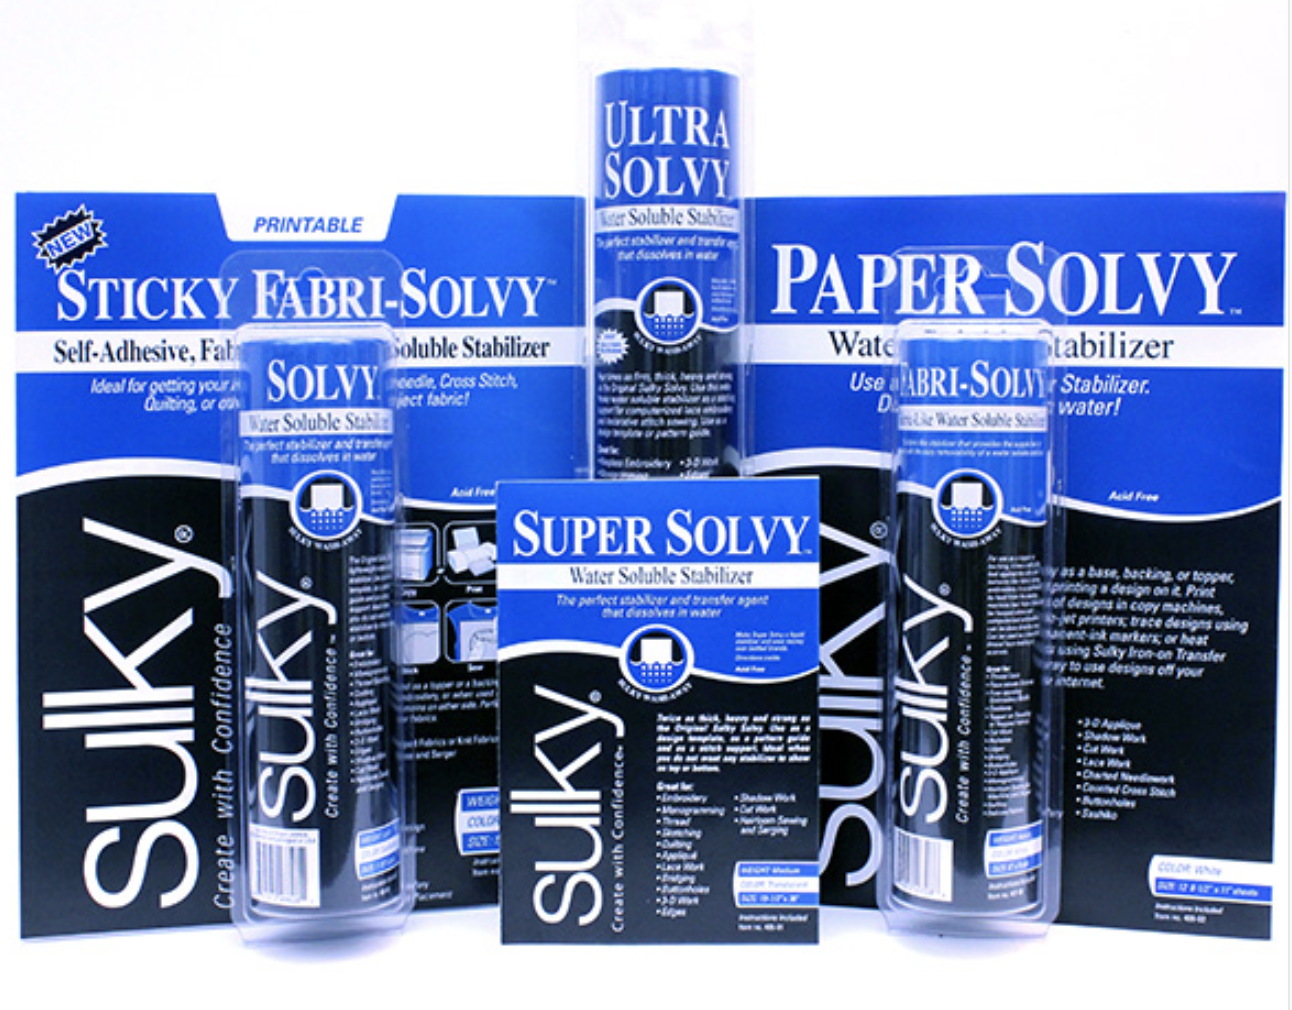 Using Sulky Solvy Water Soluble Stabilizer for the first time, but